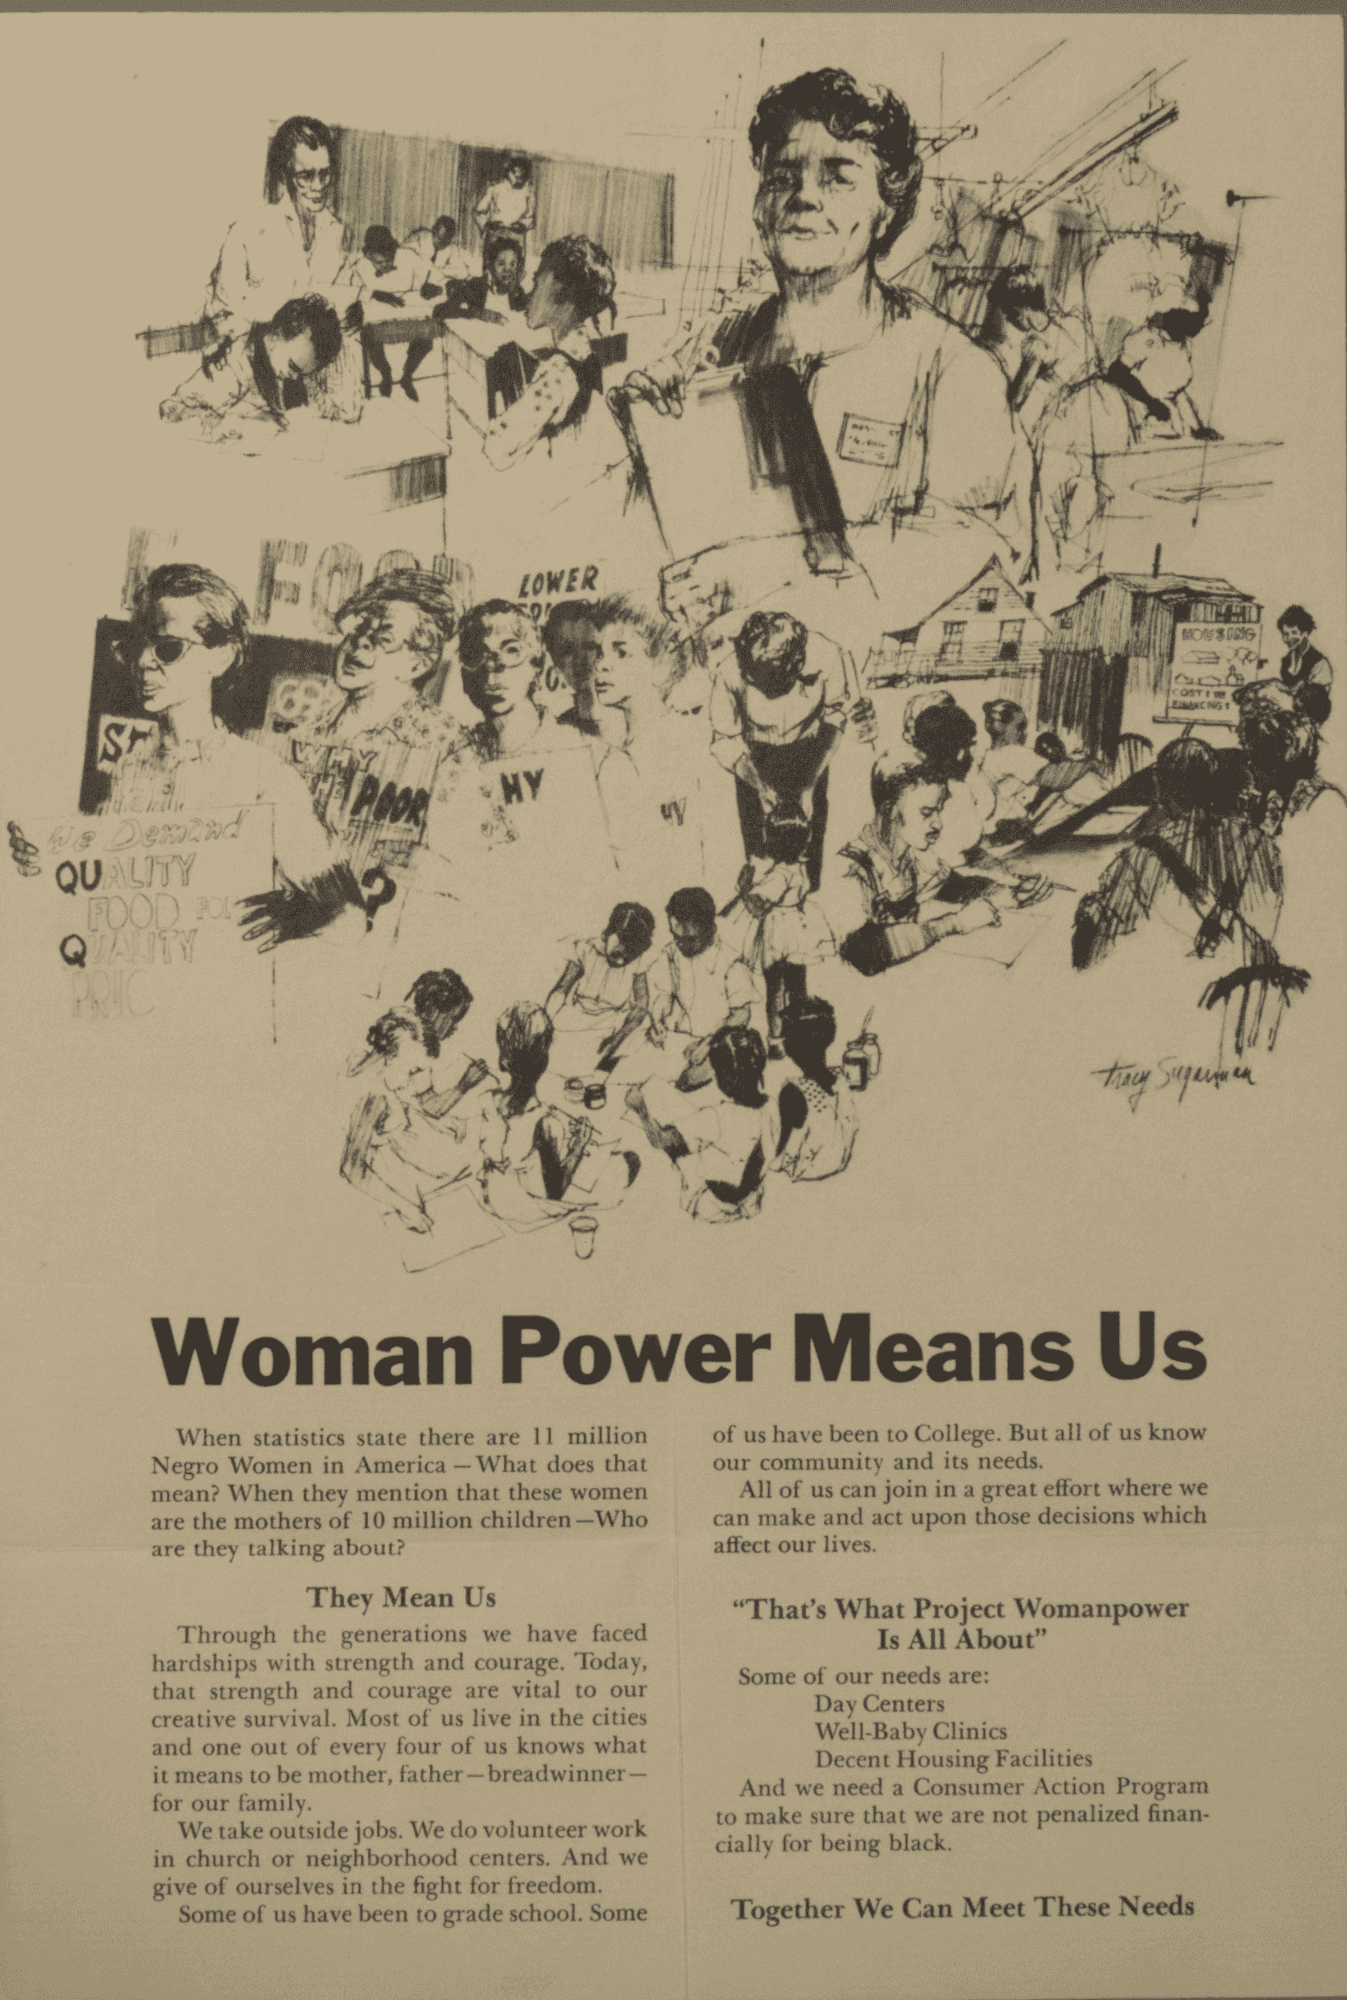 A brochure with pencil drawings of different women protesting at the top and a few paragraphs below the title "Woman Power Means Us".